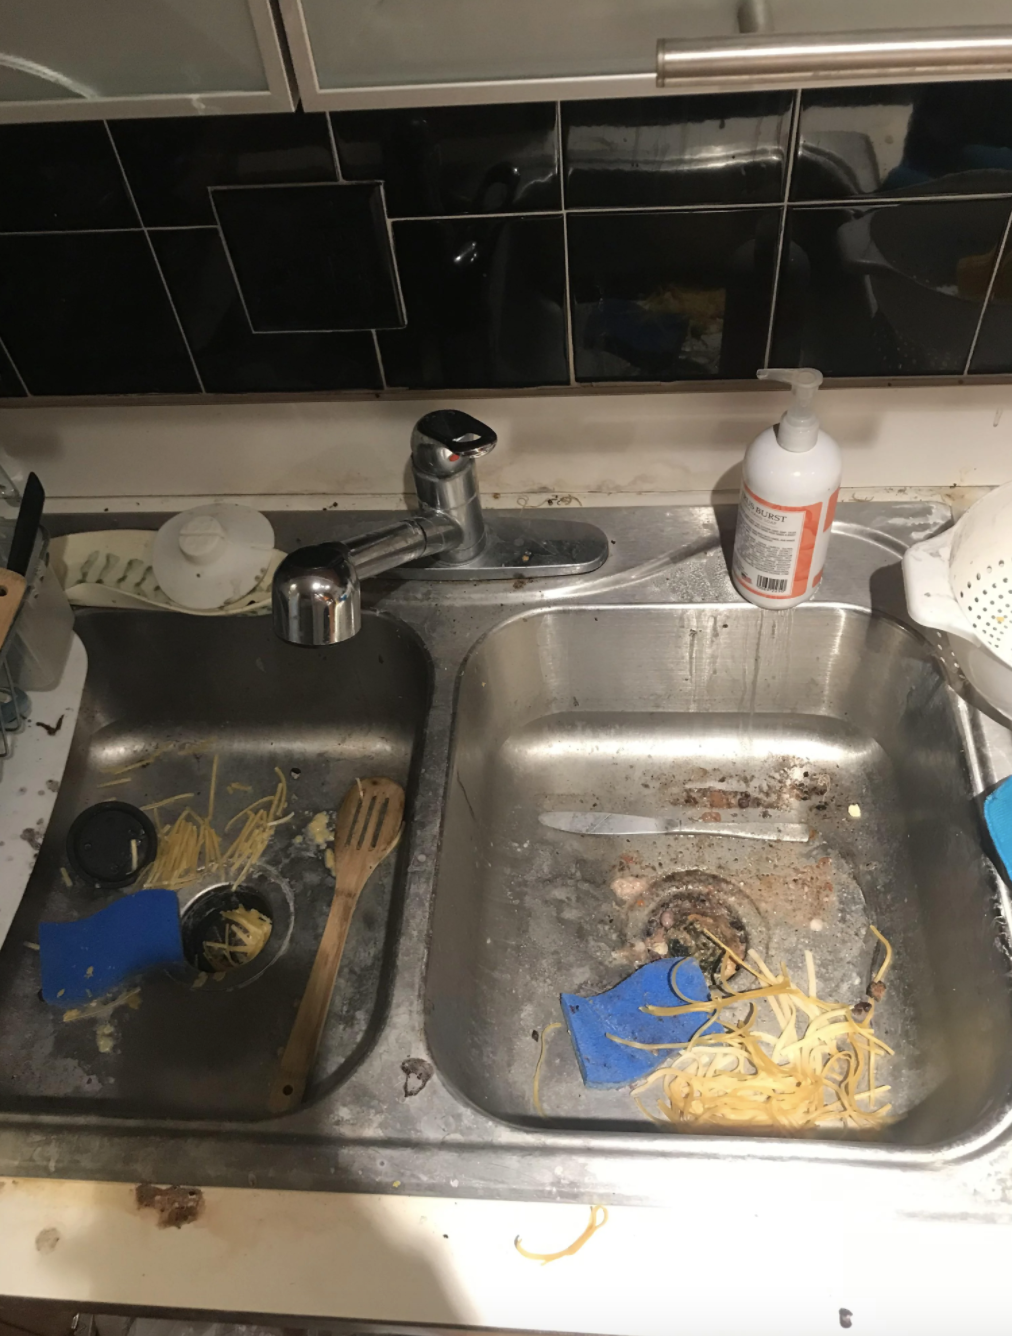 Dirty sink filled with spaghetti